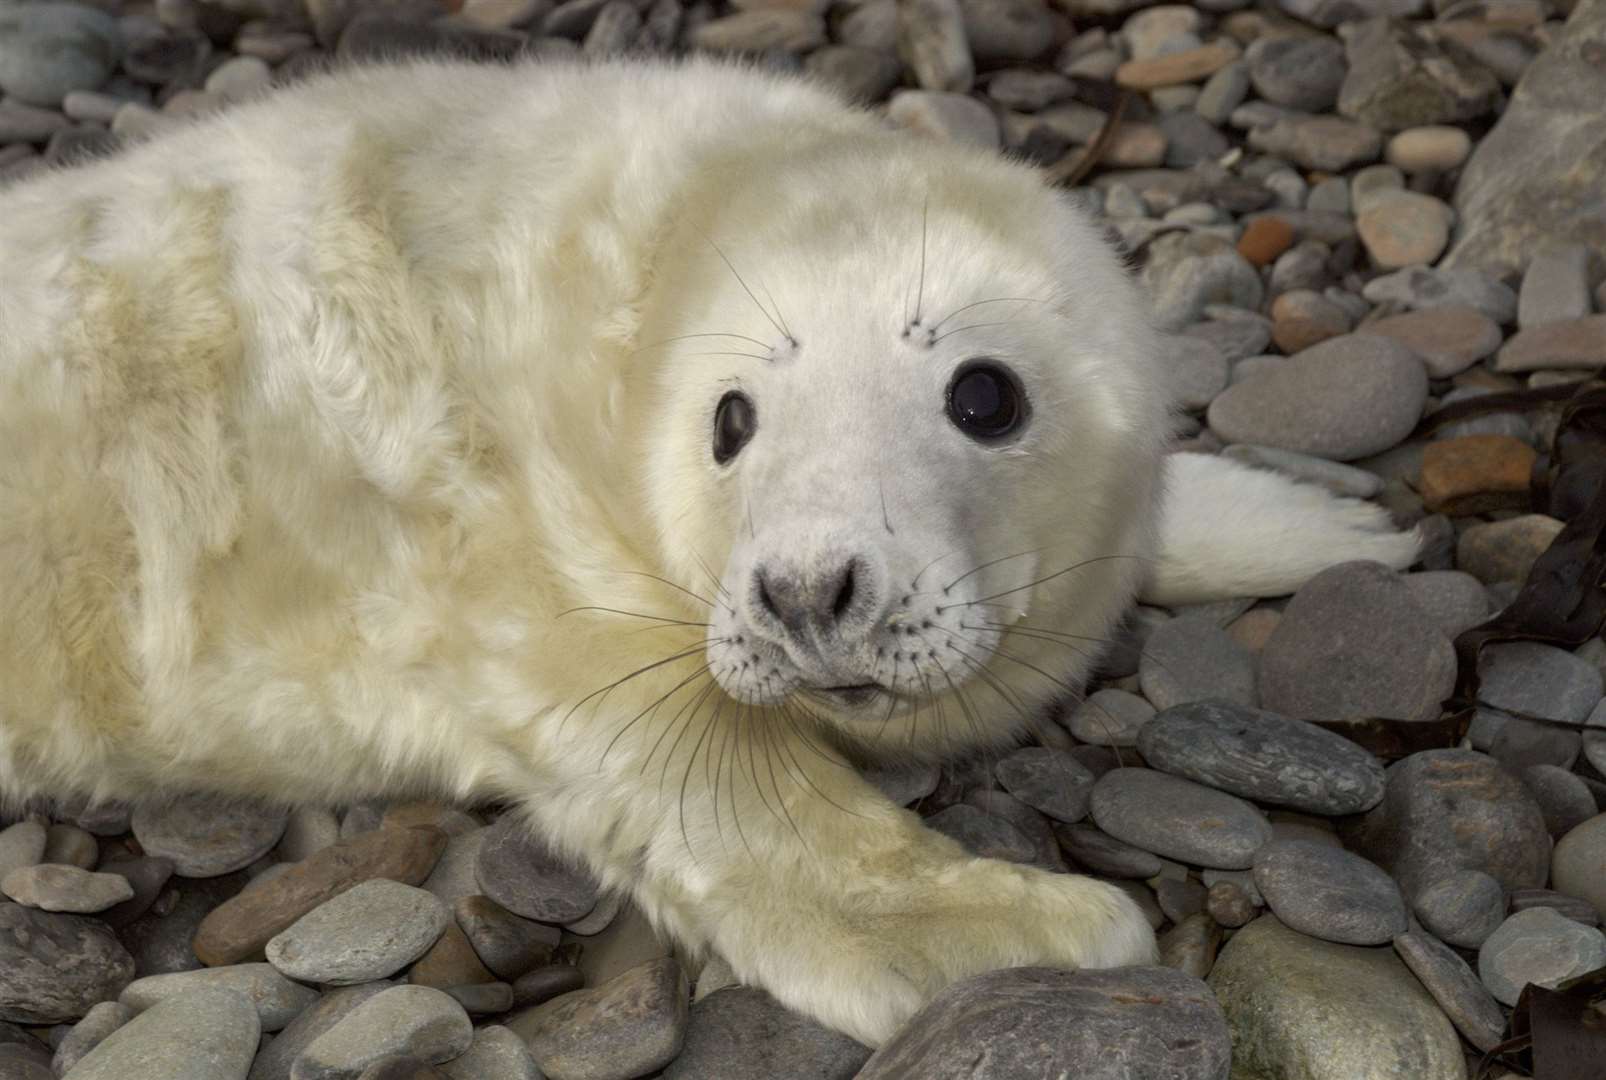 Seals are among the animals granted more protection under the new legislation.